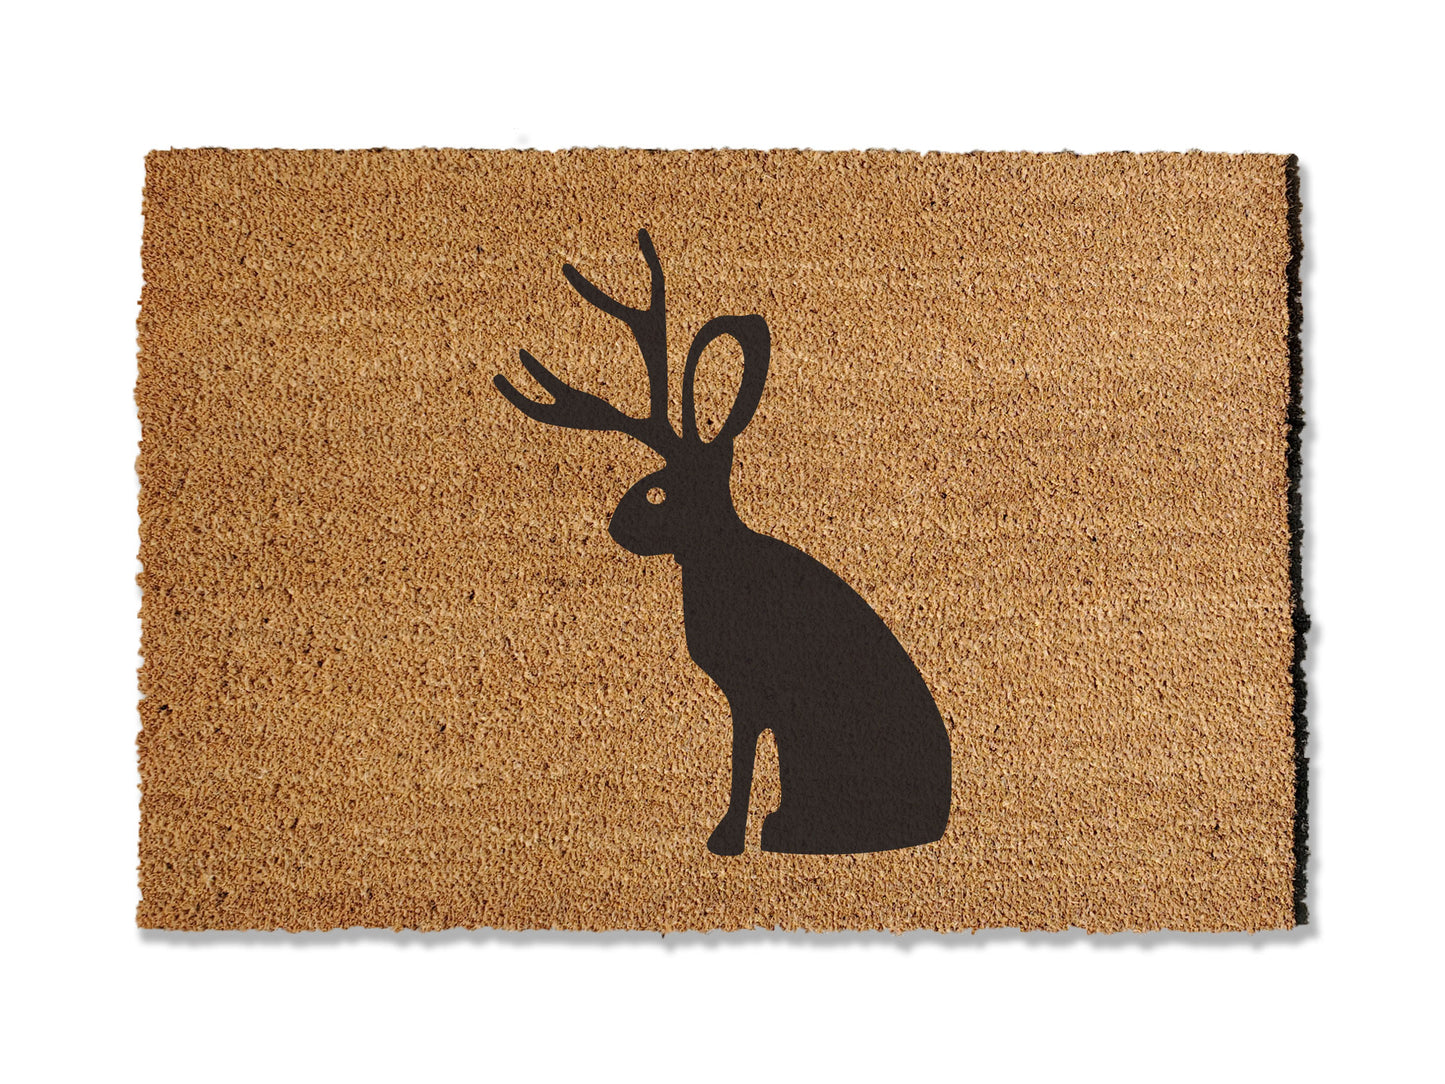 Welcome guests with our coir welcome doormat, featuring a design of the mystical jackalope. Available in multiple sizes, this is the perfect gift for jackalope lovers, adding a touch of canine charm that effortlessly spruces up your entryway.